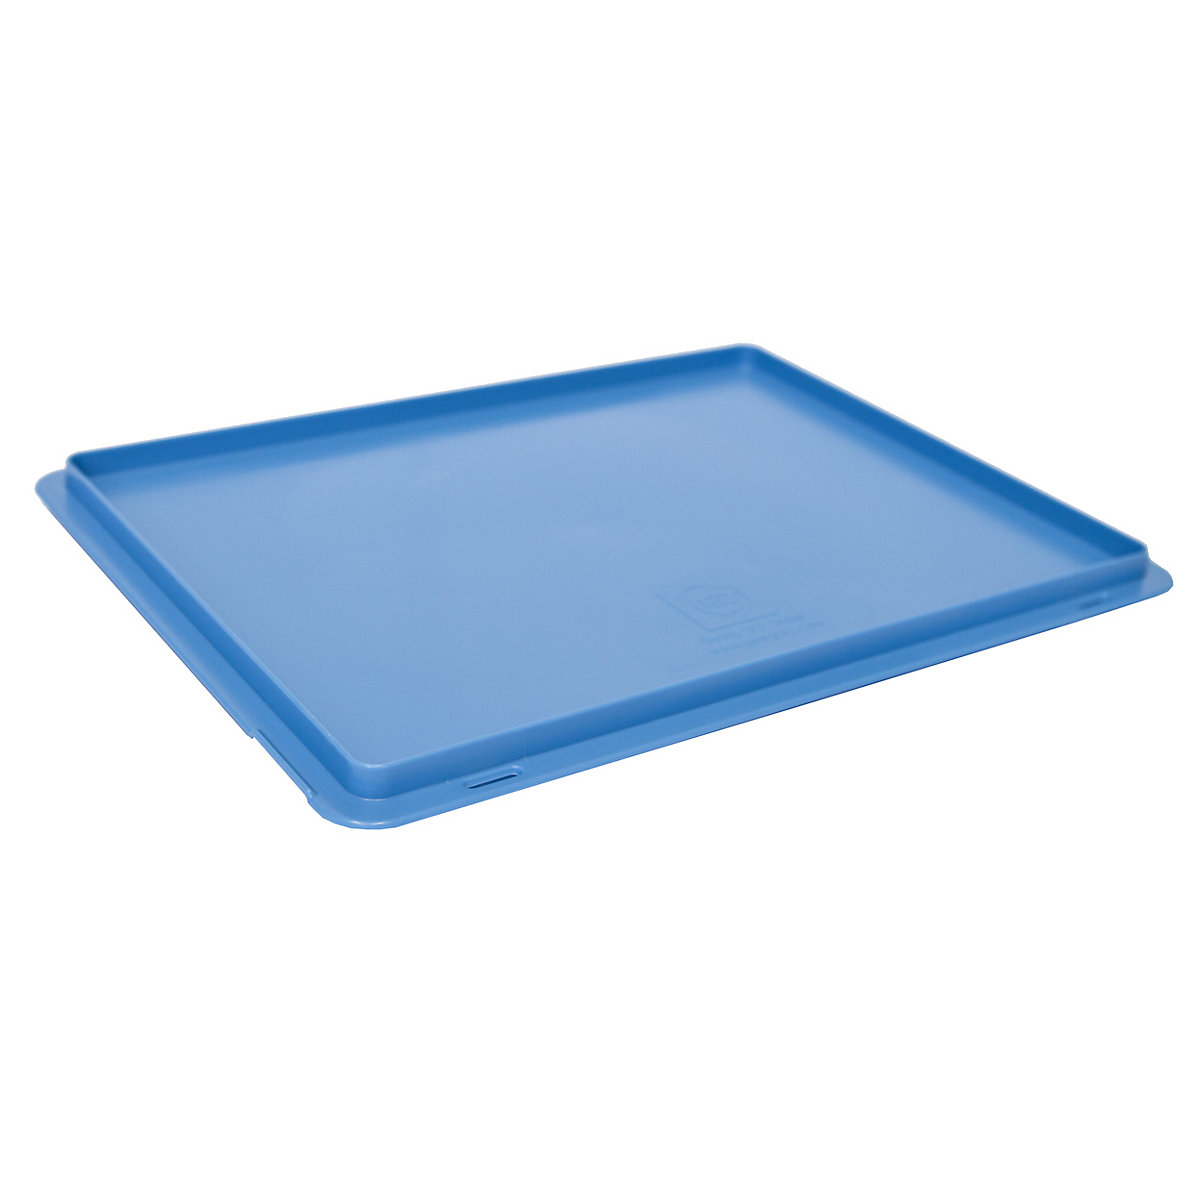 Lid for Euro size stacking containers, pack of 2